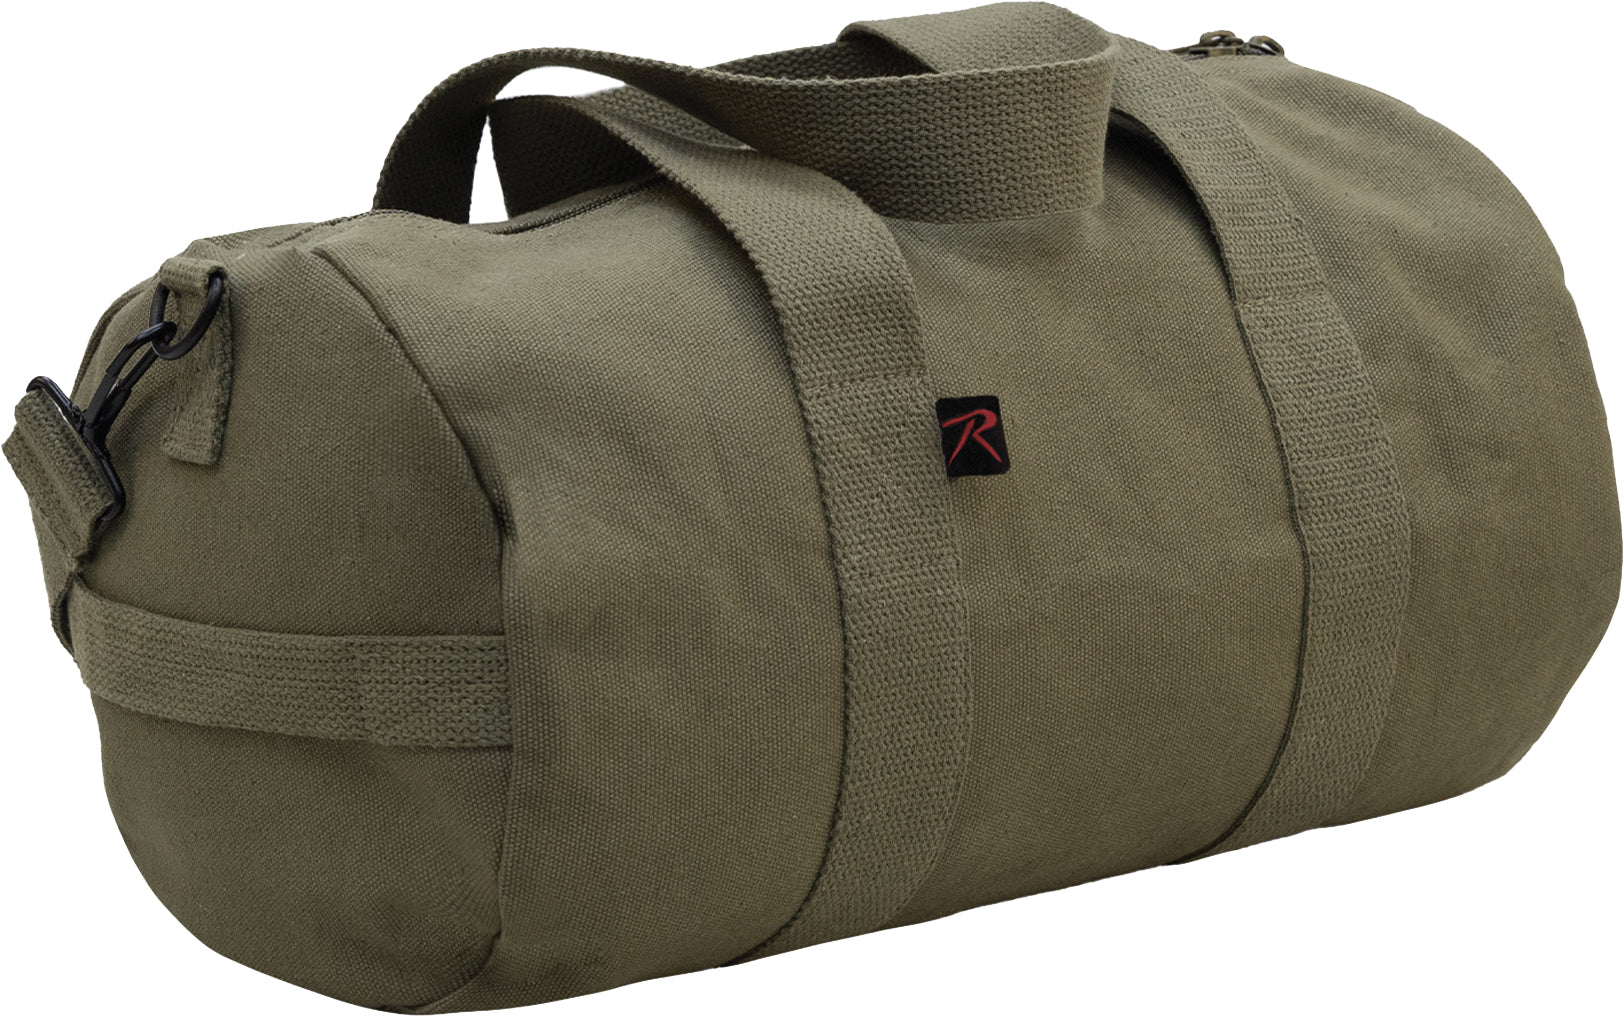 Olive Drab Heavyweight Cotton Canvas Duffle Bag Sports Gym Shoulder & Carry Bag 17